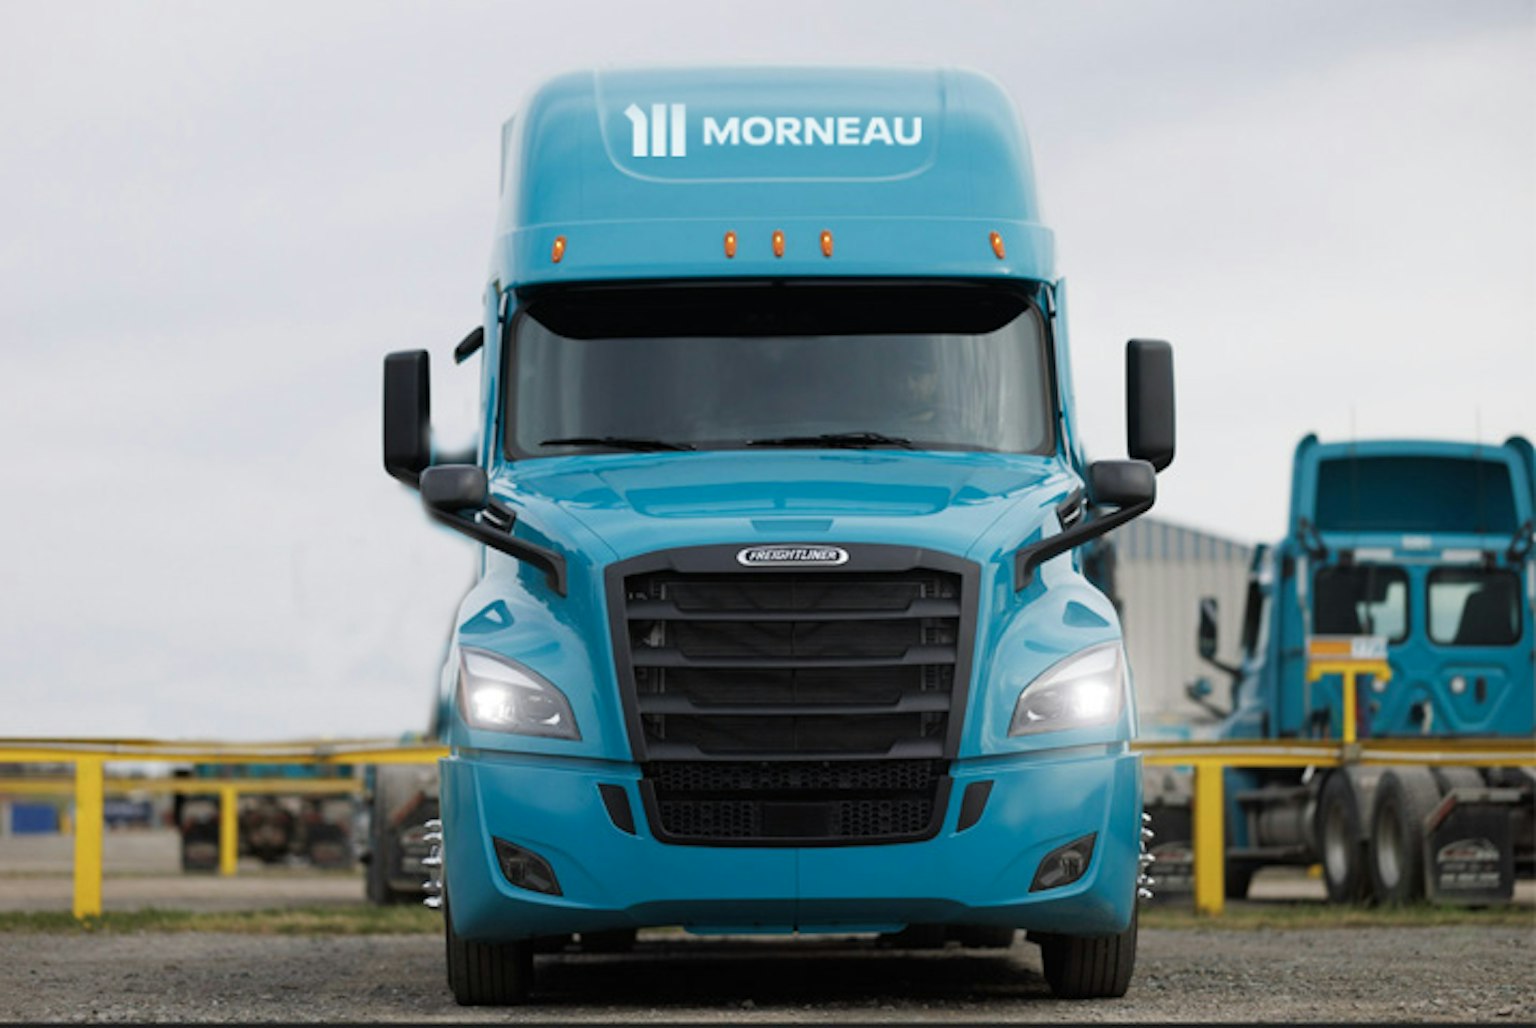 A truck from the Groupe Morneau's fleet